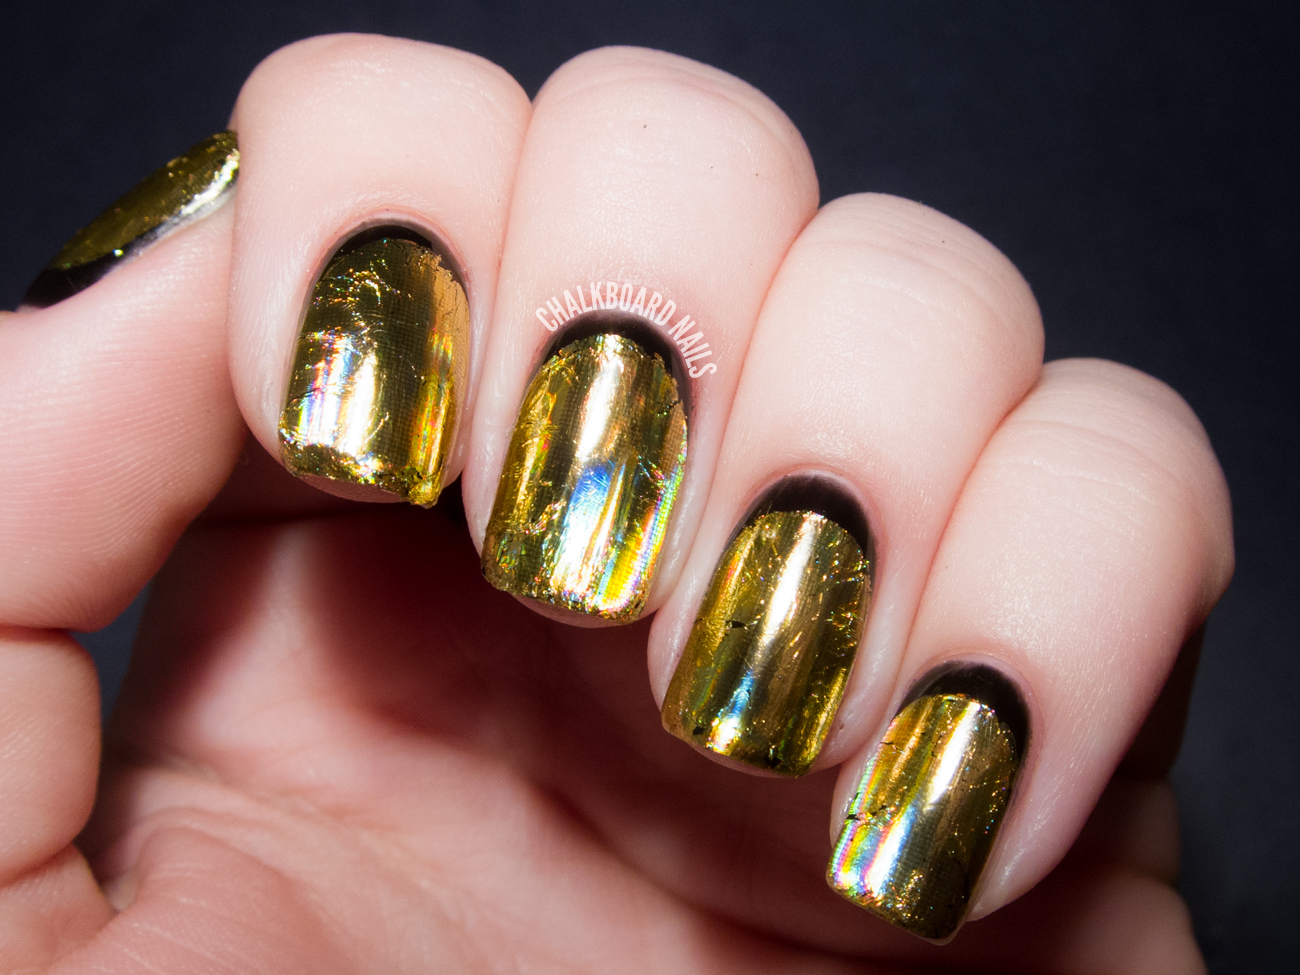 Black, Silver, and Gold Glitter Nail Art - wide 10